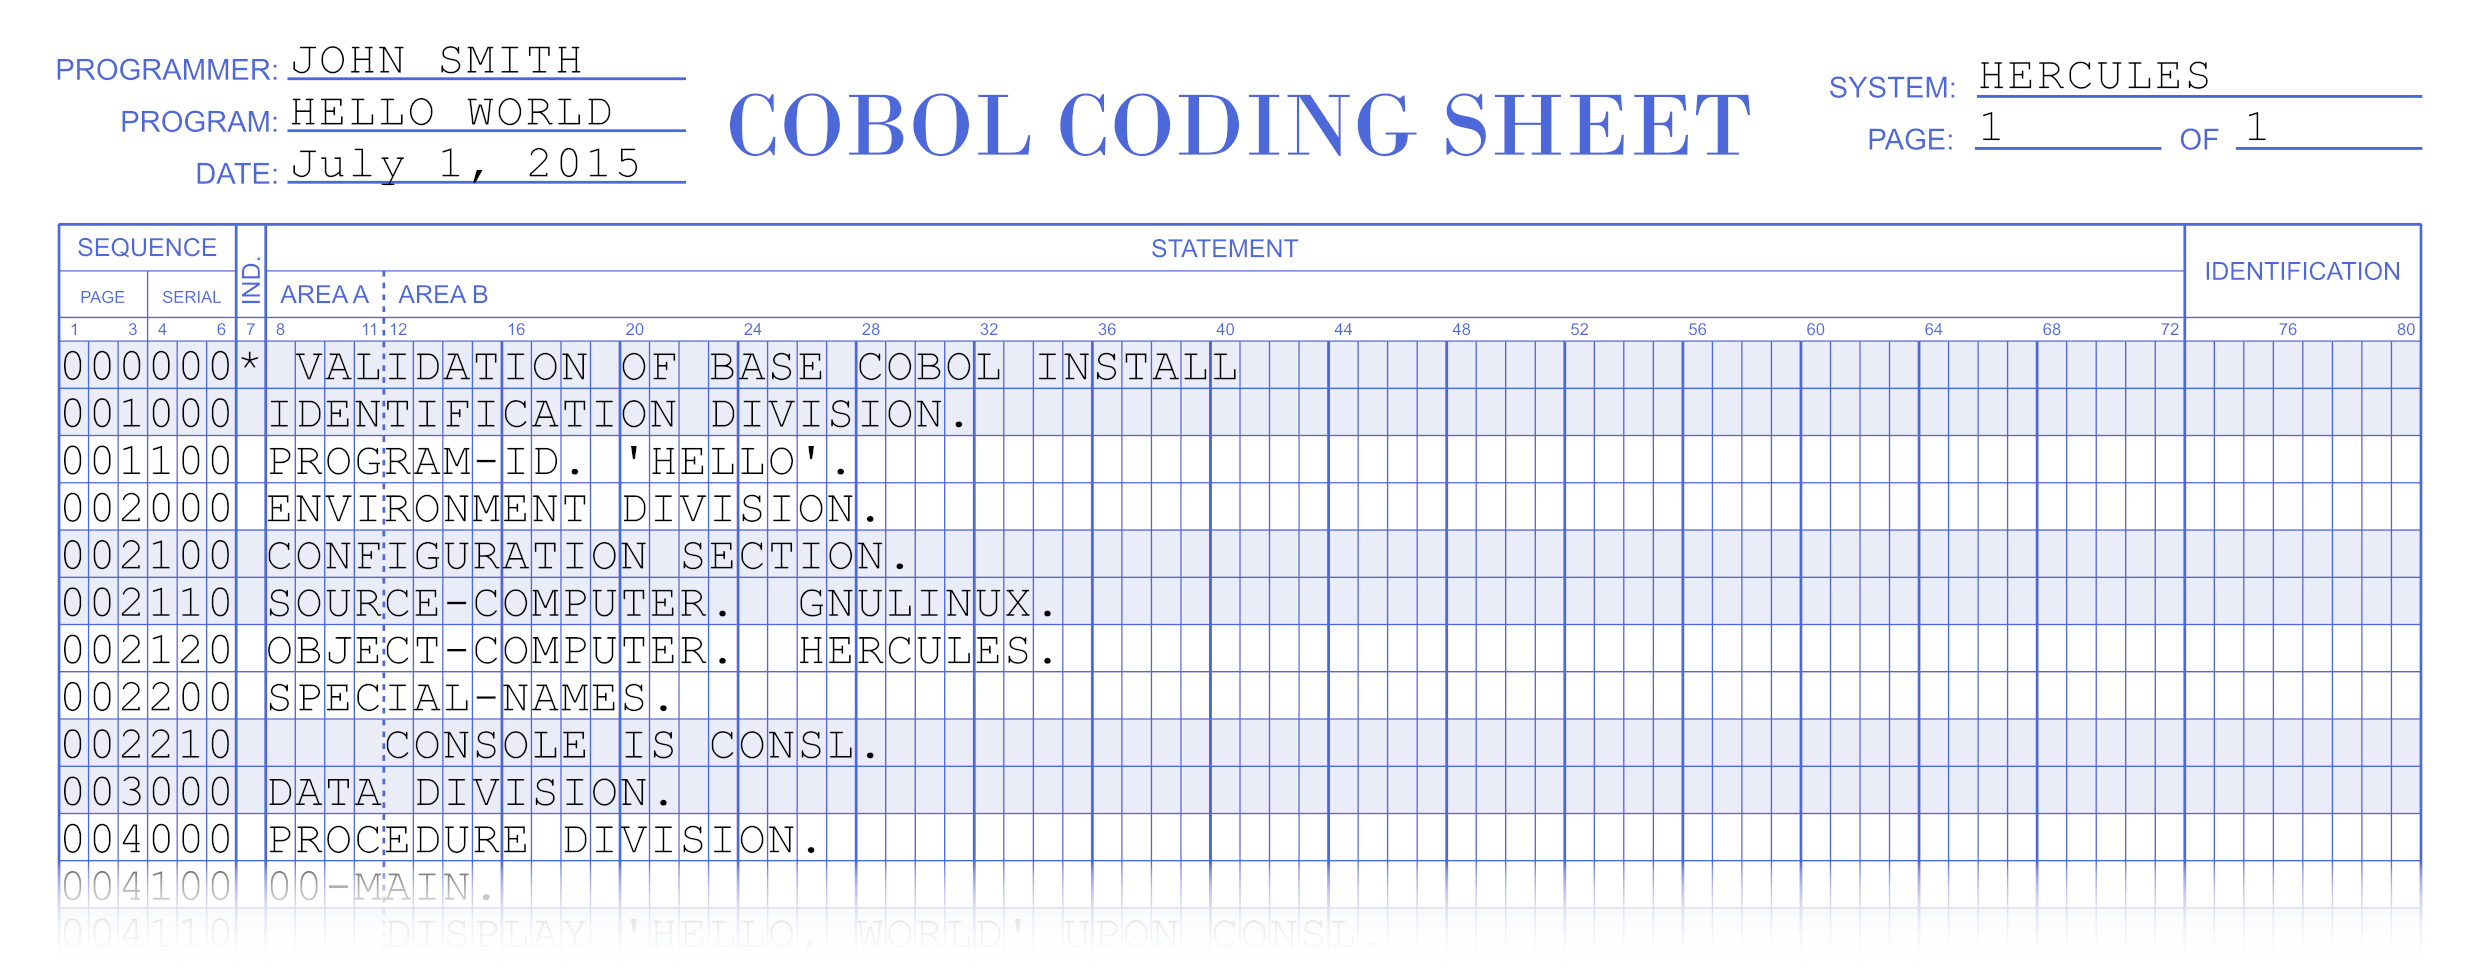 An example of a Coding Sheet